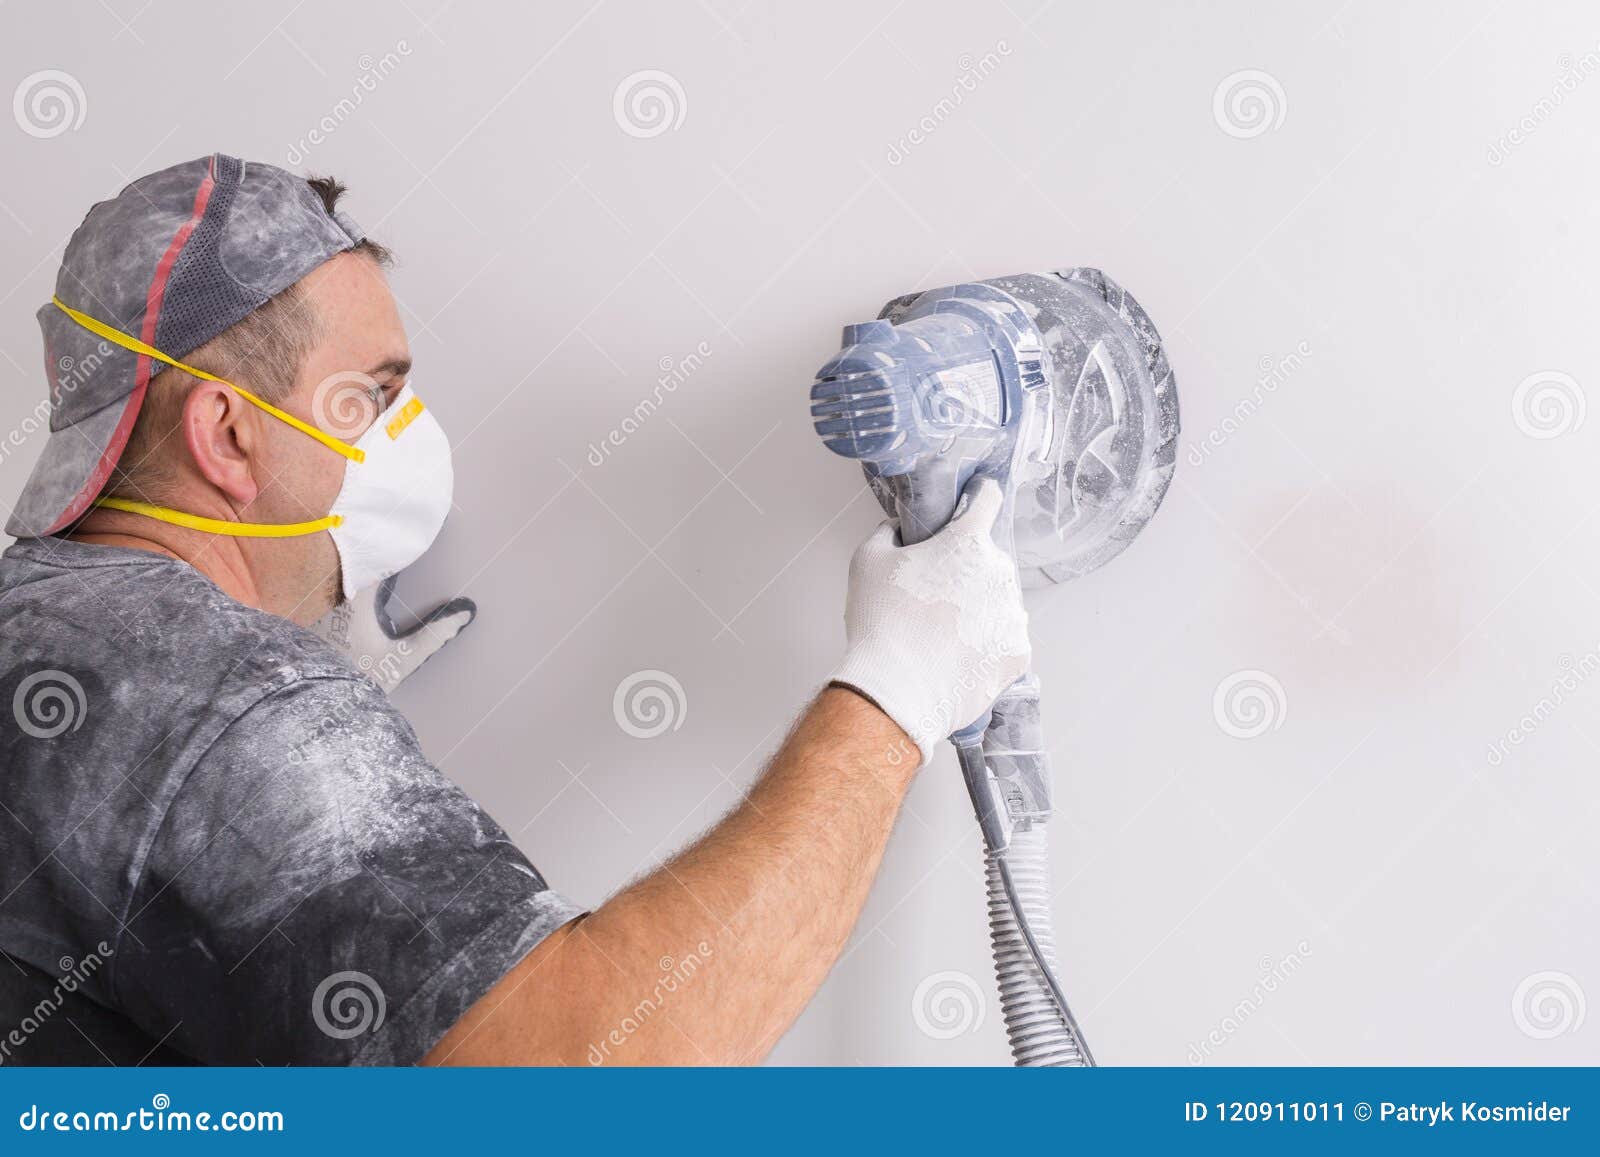 plasterer wearing dust mask polishes a wall with sanding machine